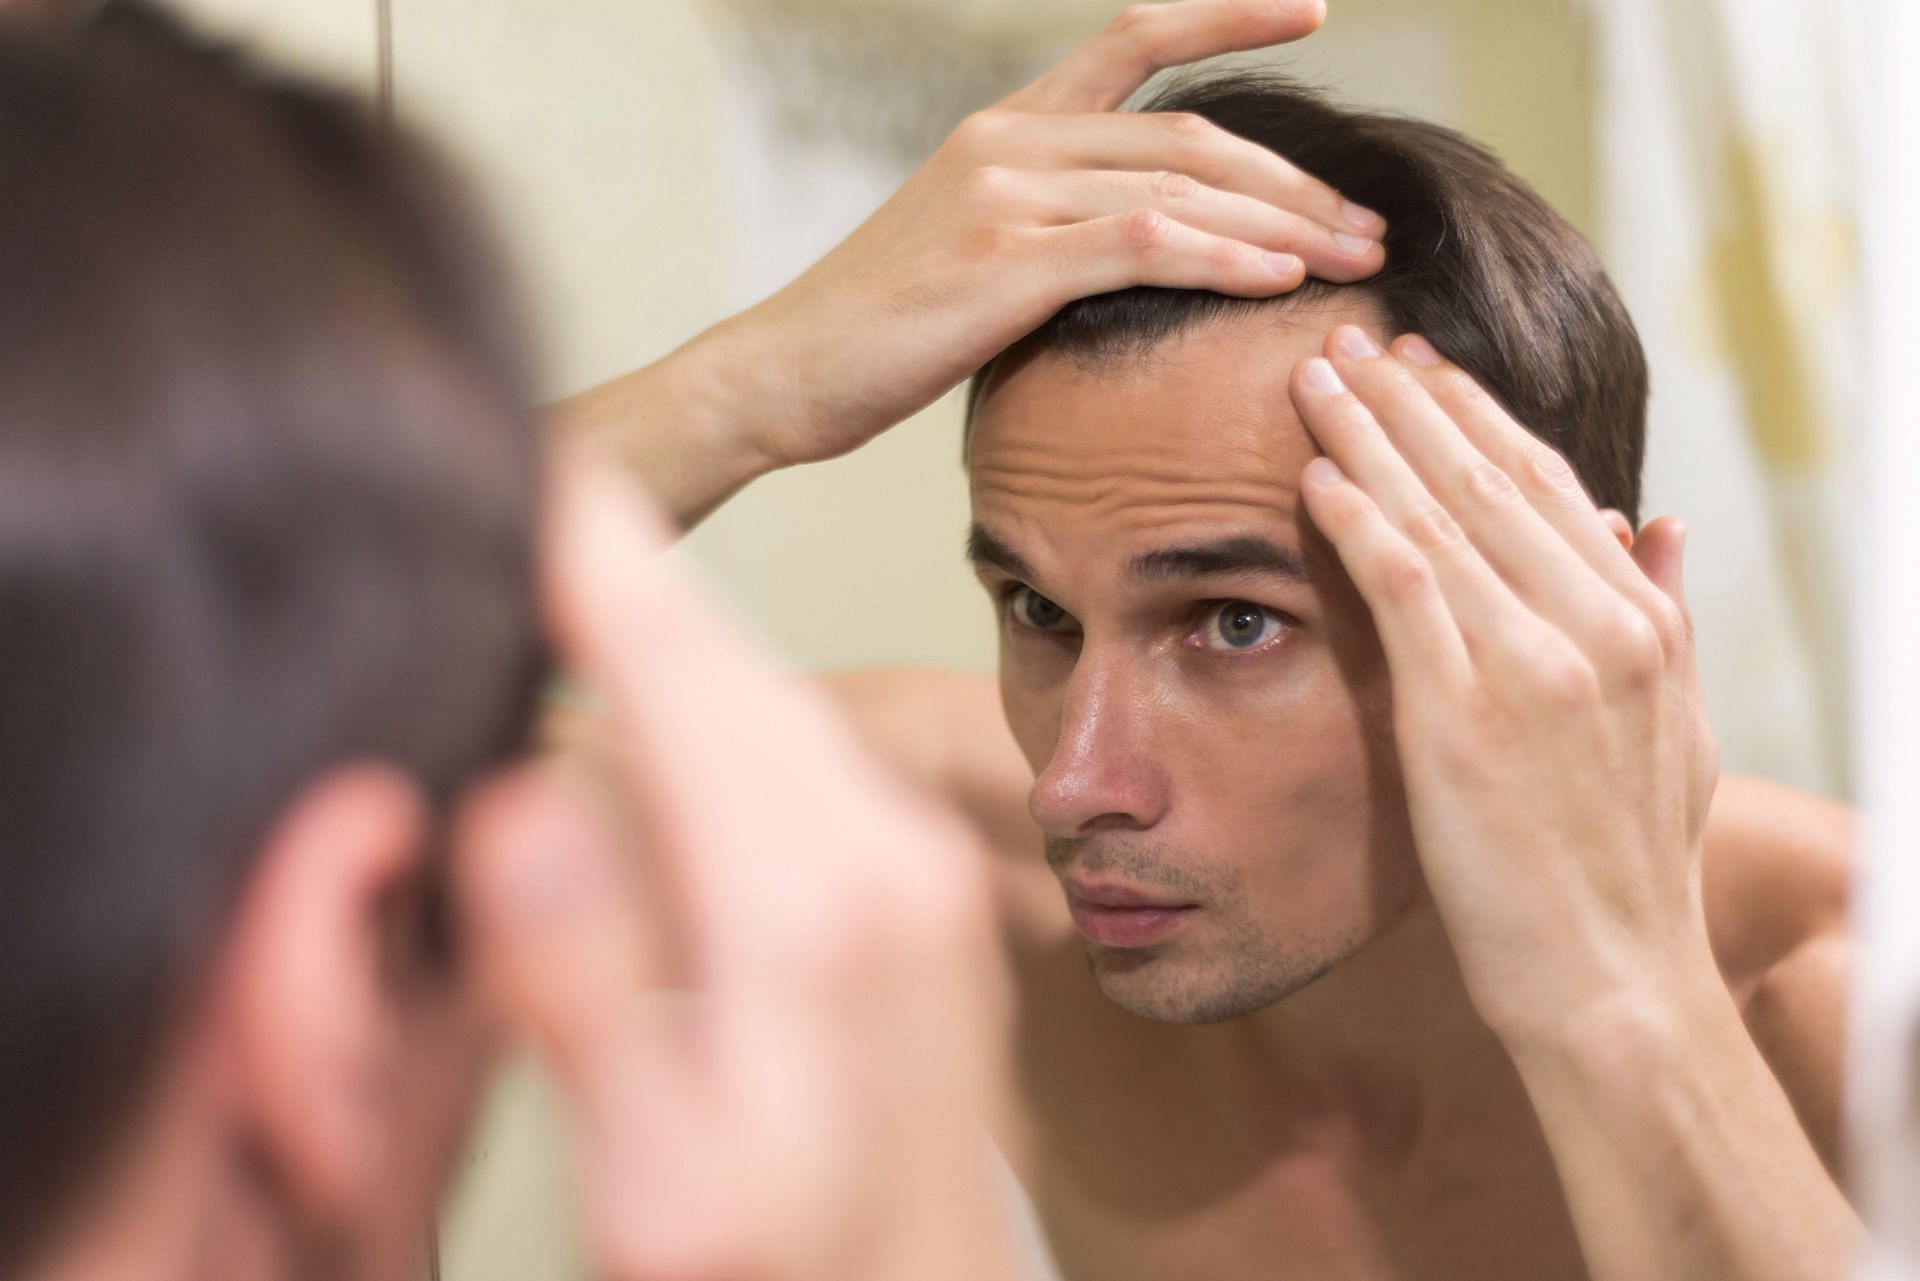 Understanding the connection between stress and hair loss is not a new area of discovery. (Image via Freepik/ Freepik)